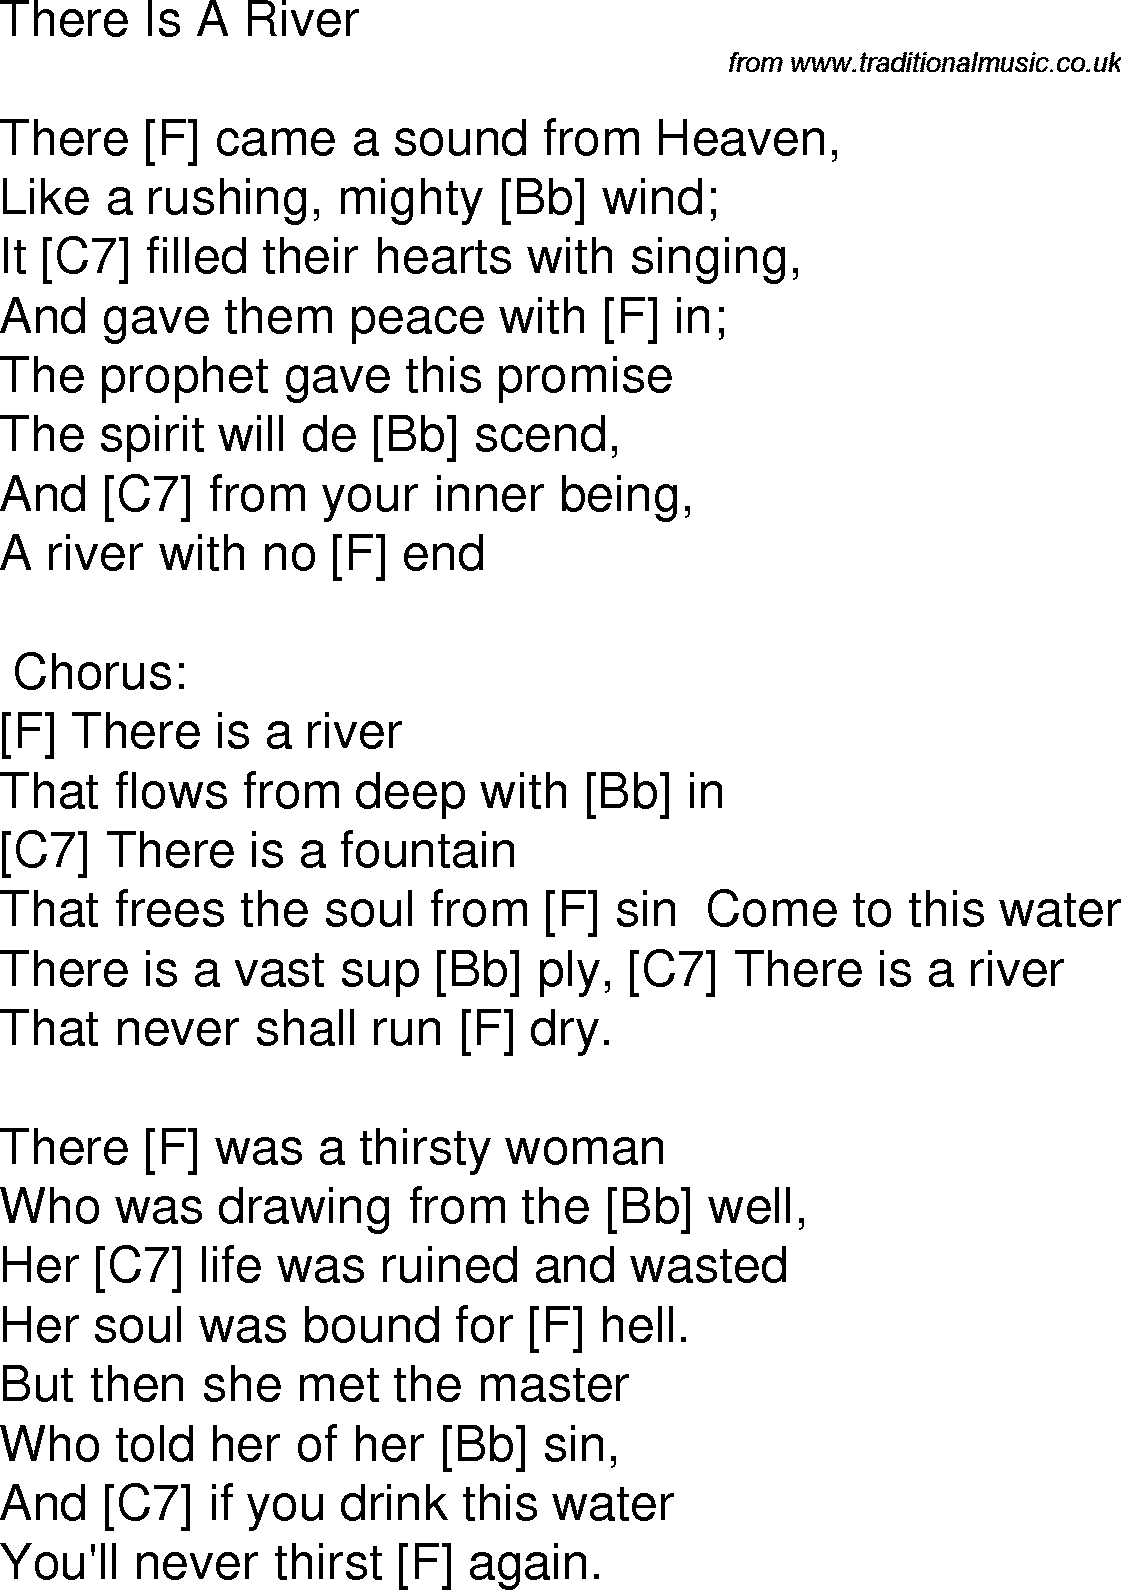 Old time song lyrics with chords for There Is A River F